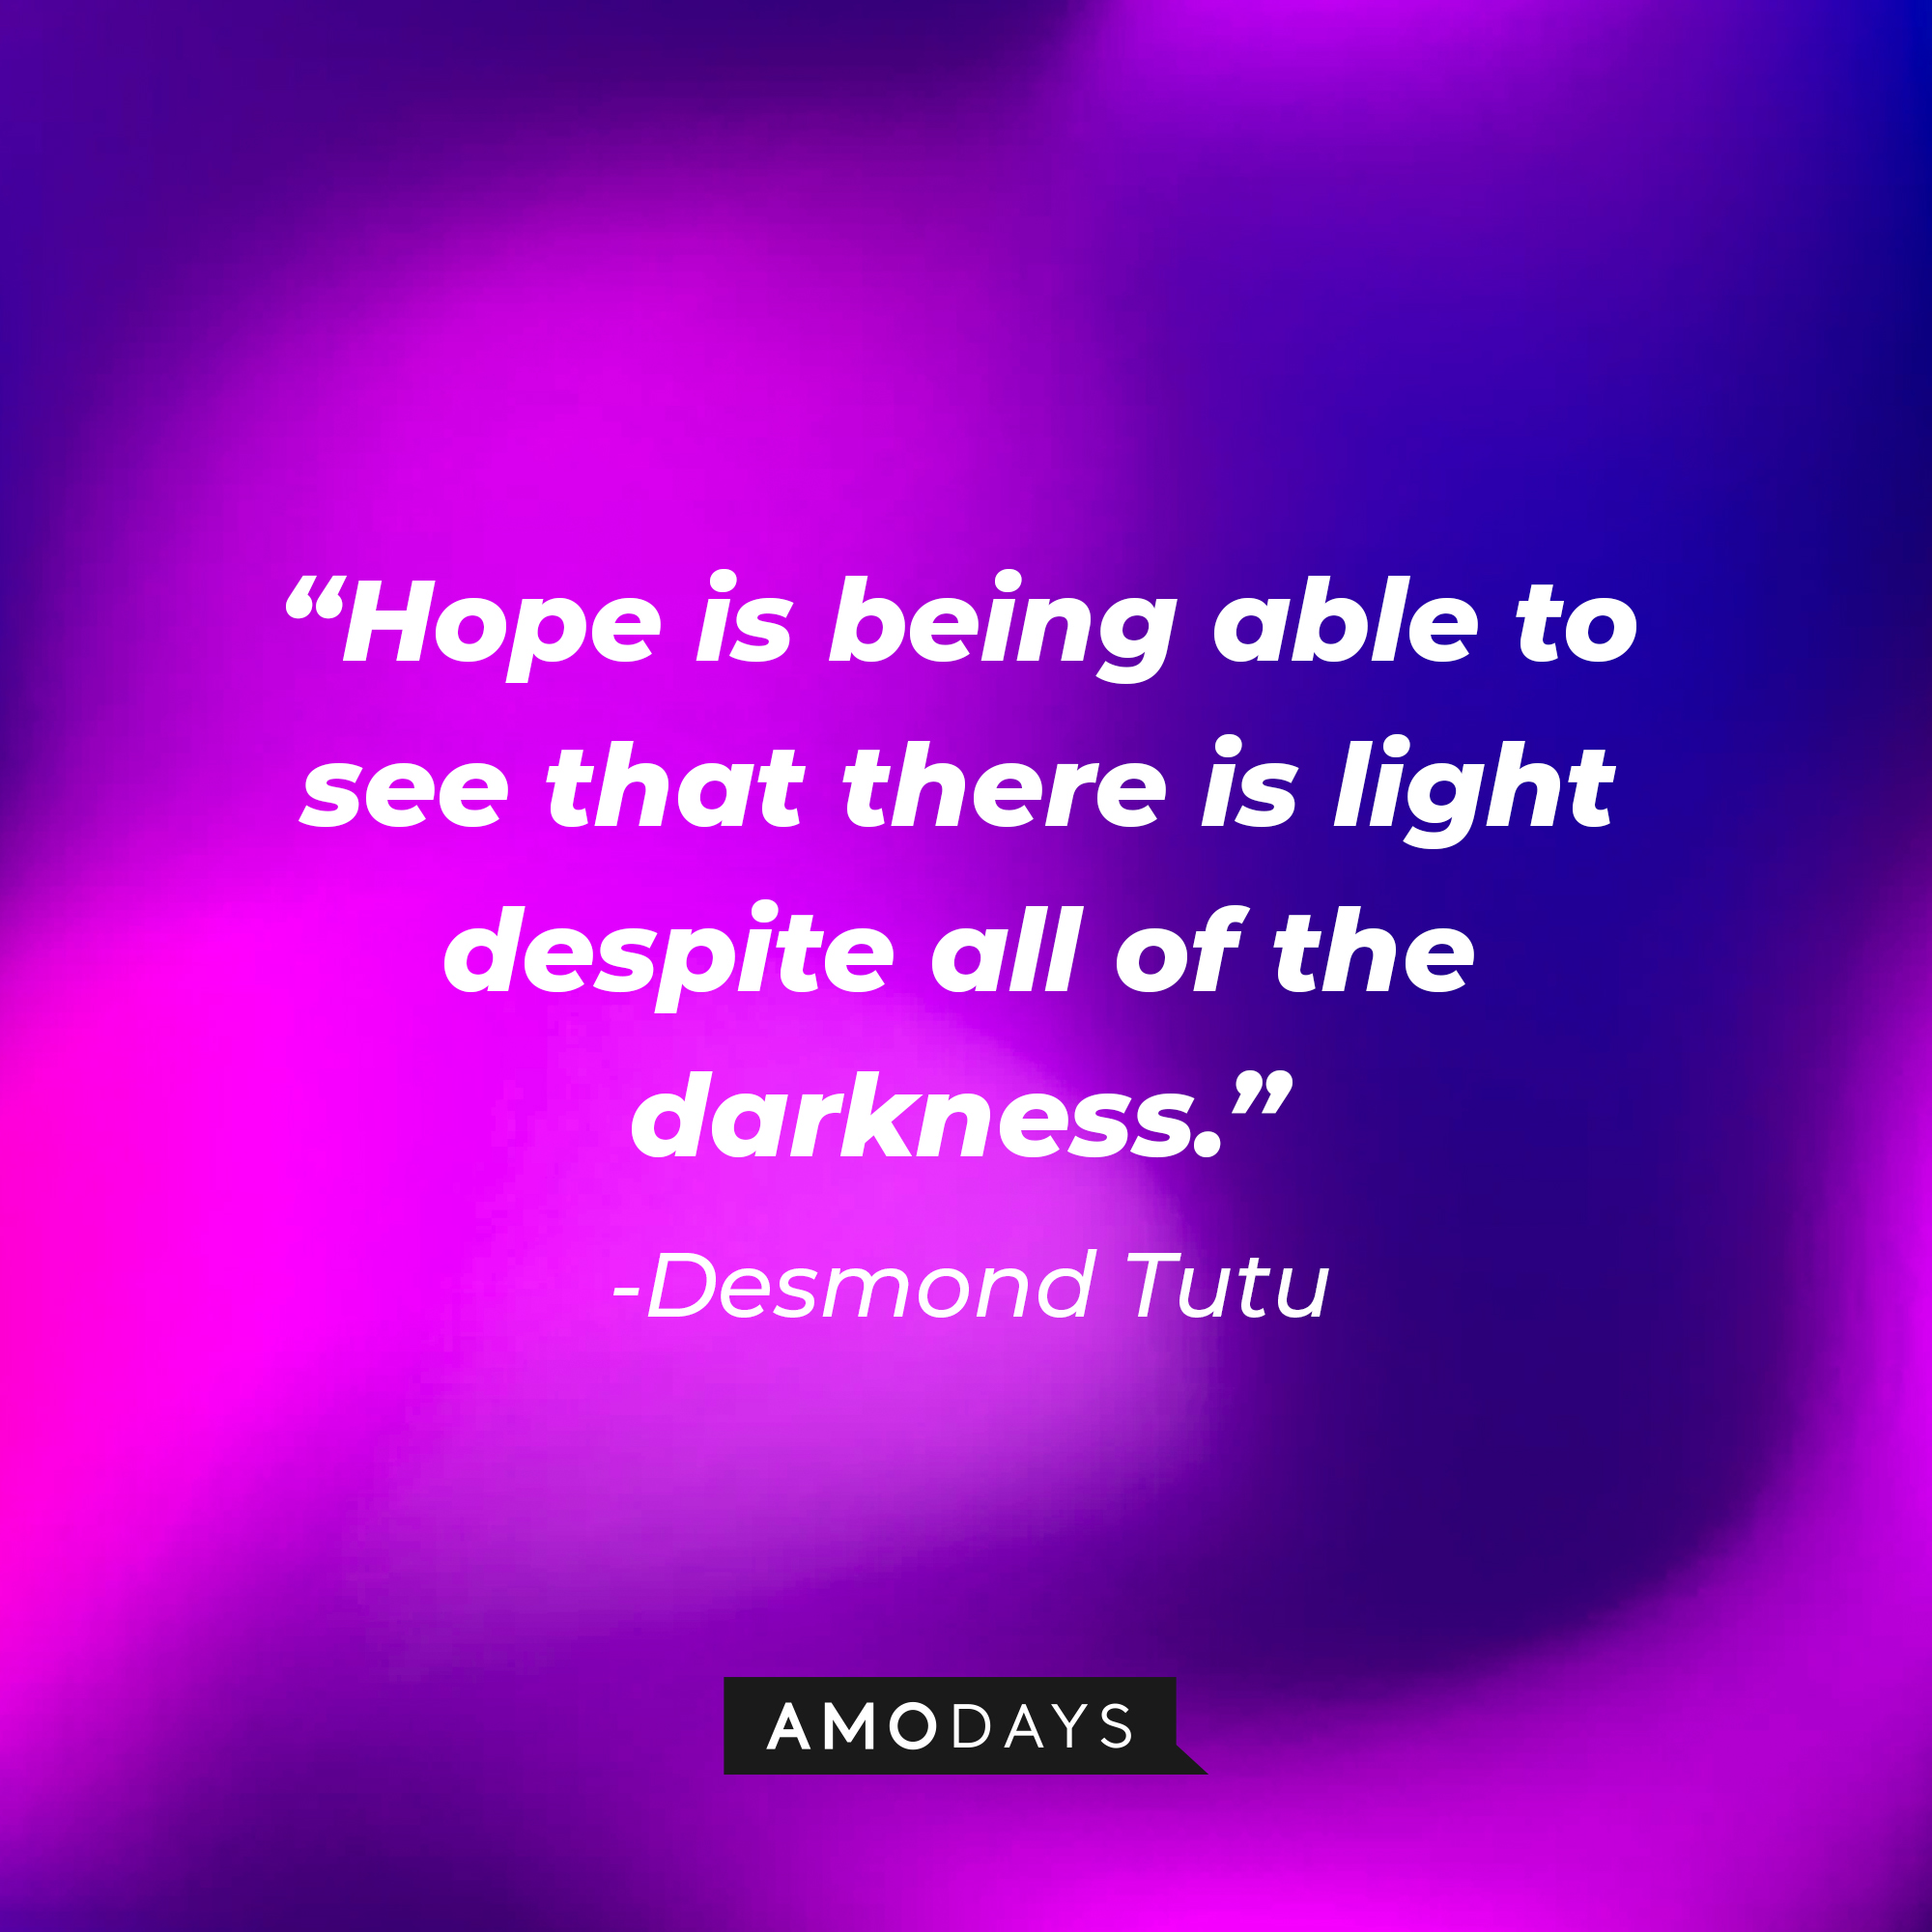 Desmond Tutu’s quote: "Hope is being able to see that there is light despite all of the darkness."  | Image: Amodays